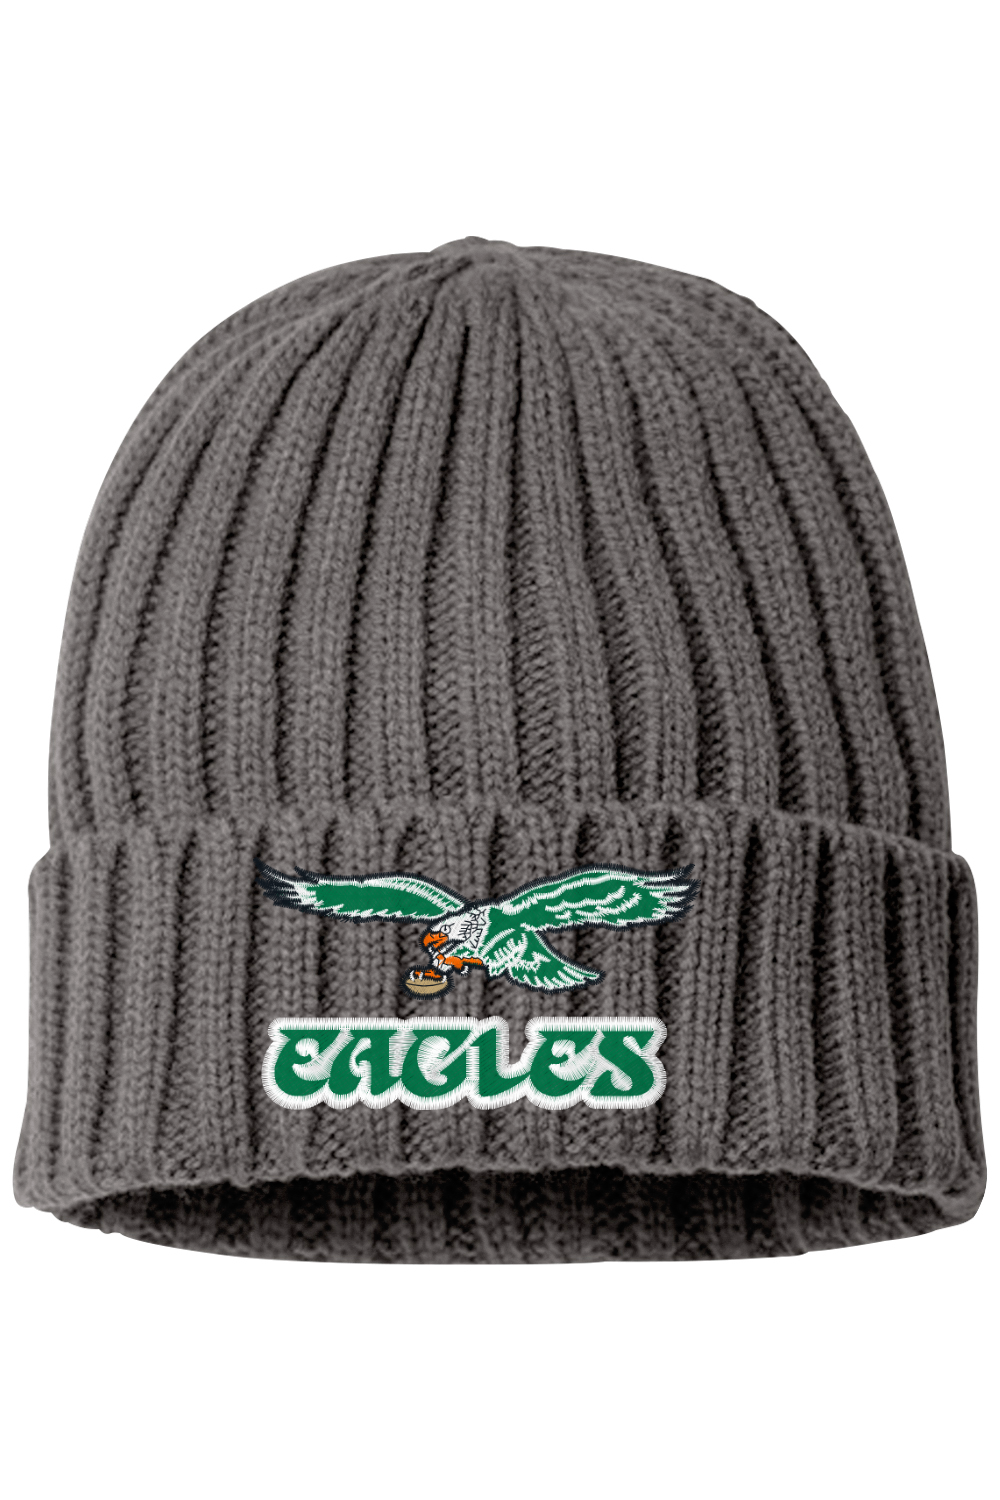 Eagles Embroidered Cable Knit